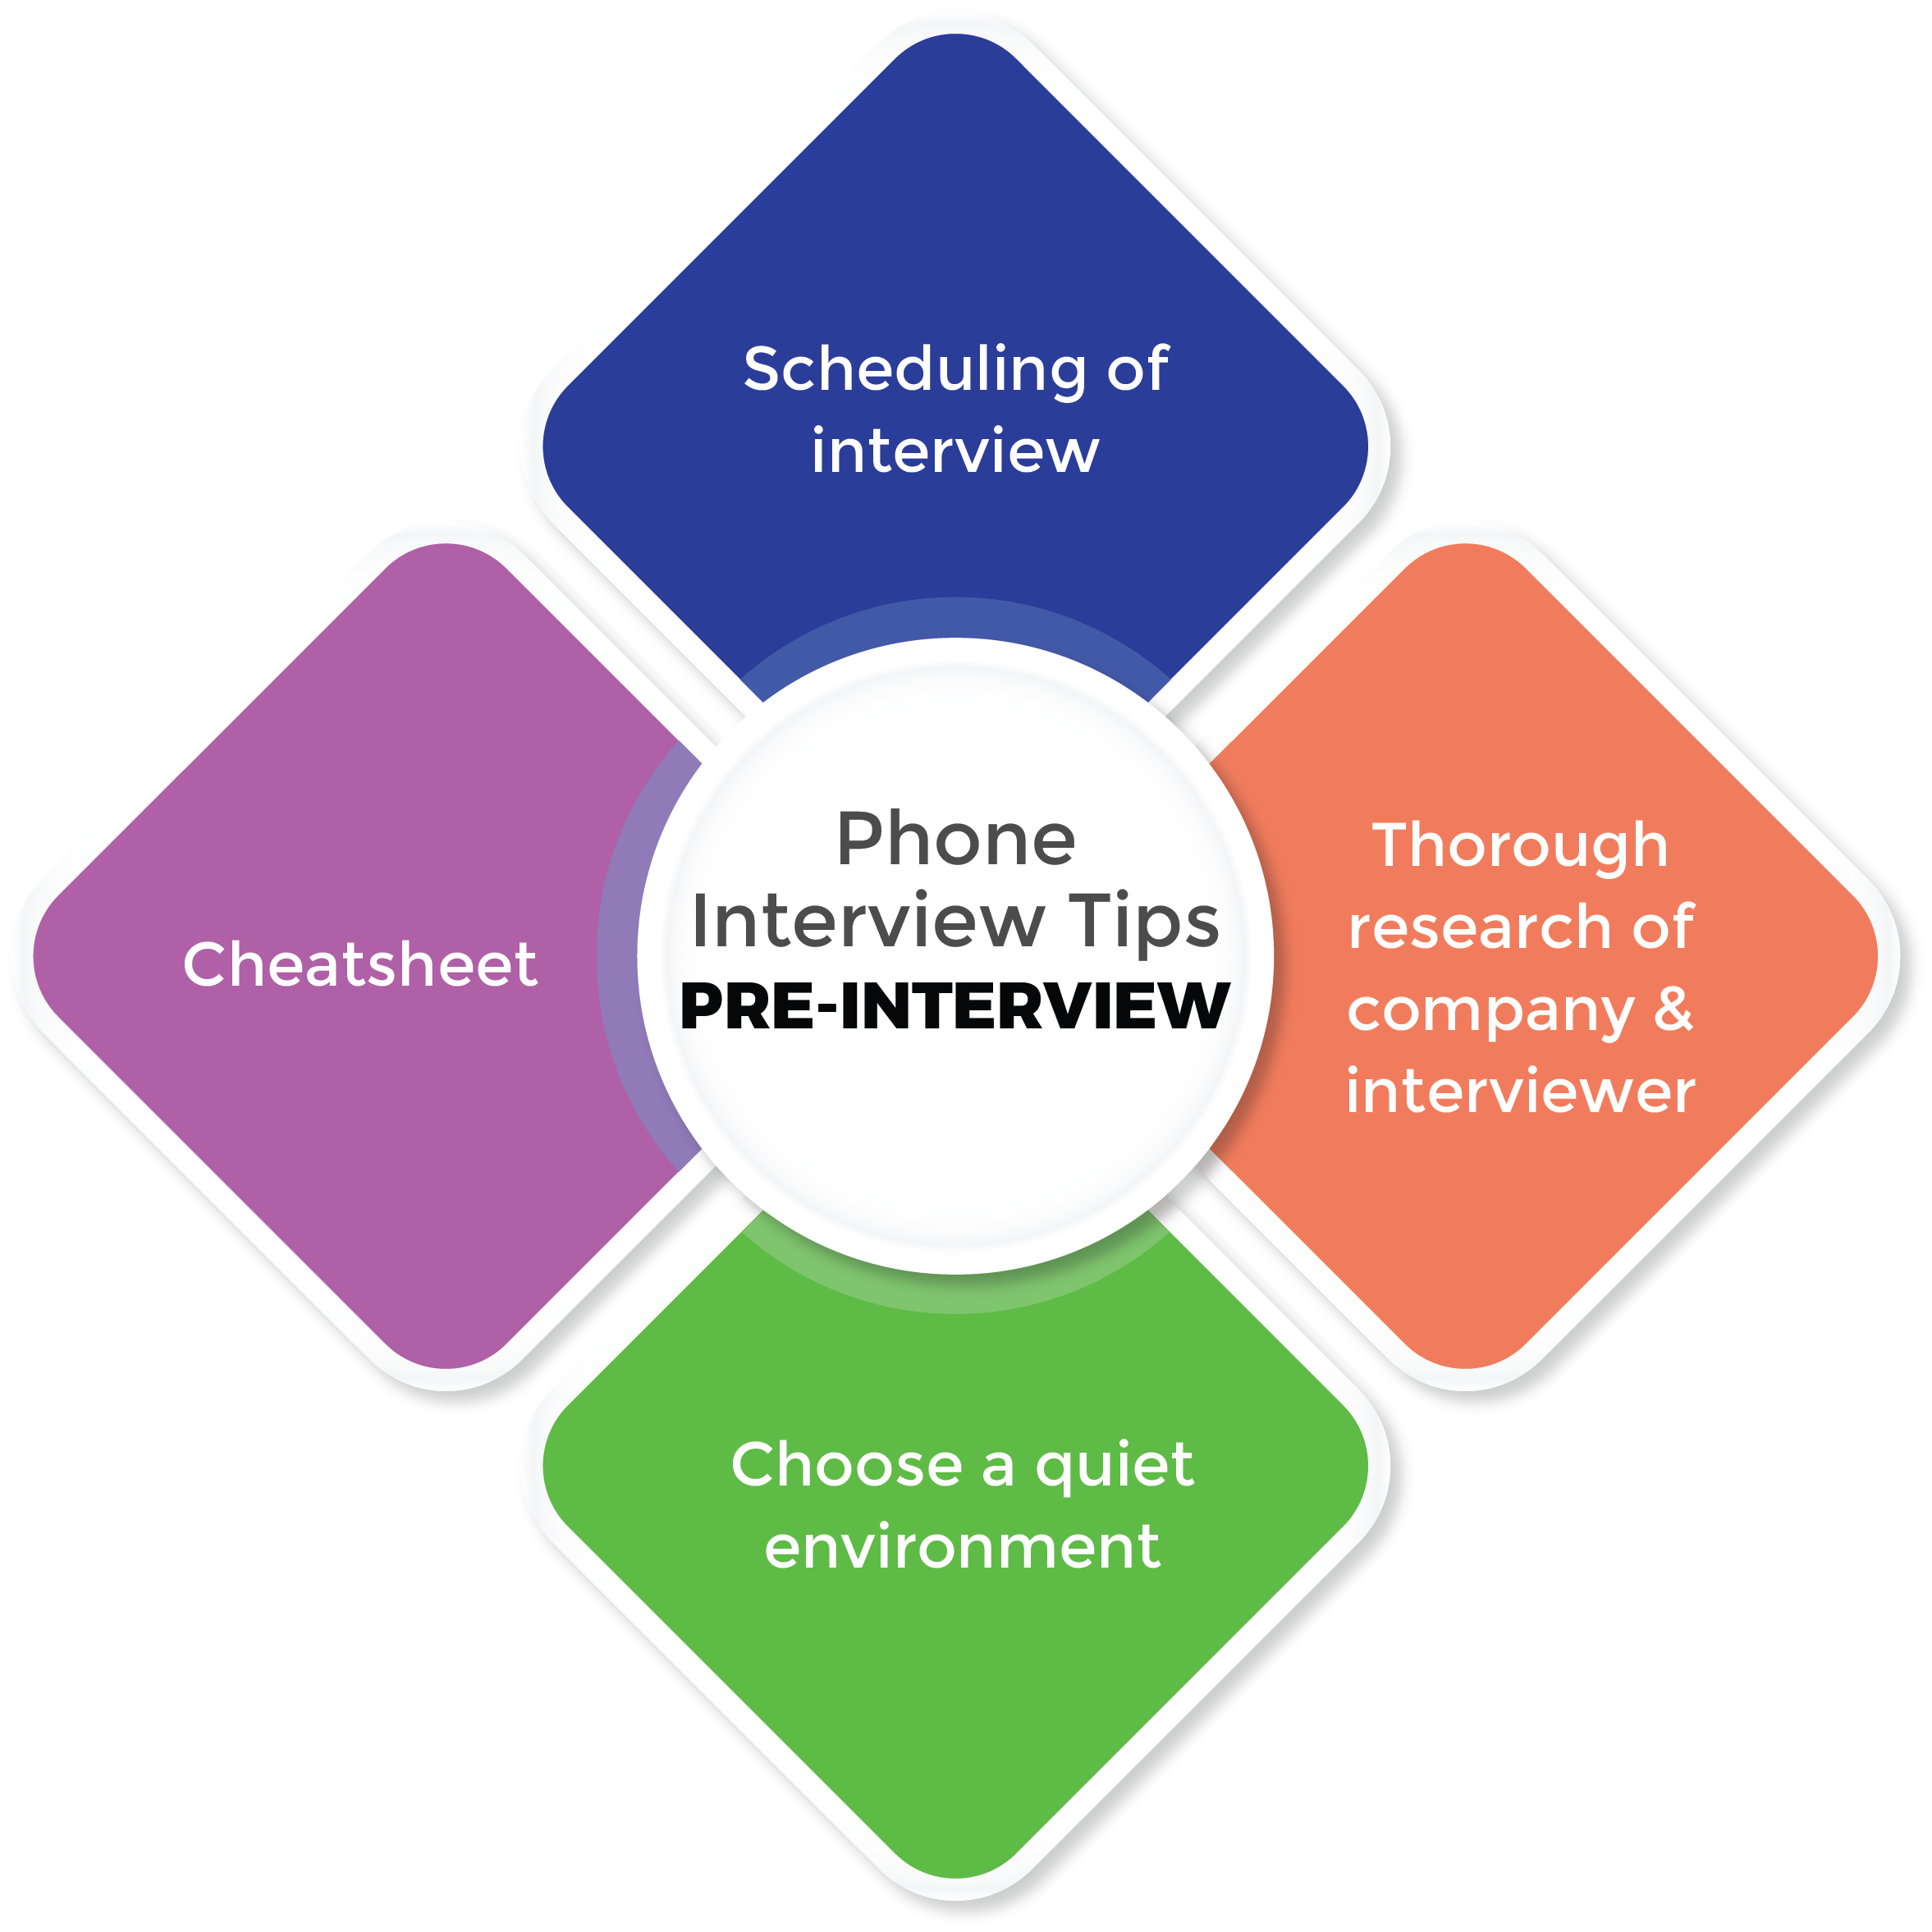 Phone-Interview-Tips-PRE-INTERVIEW